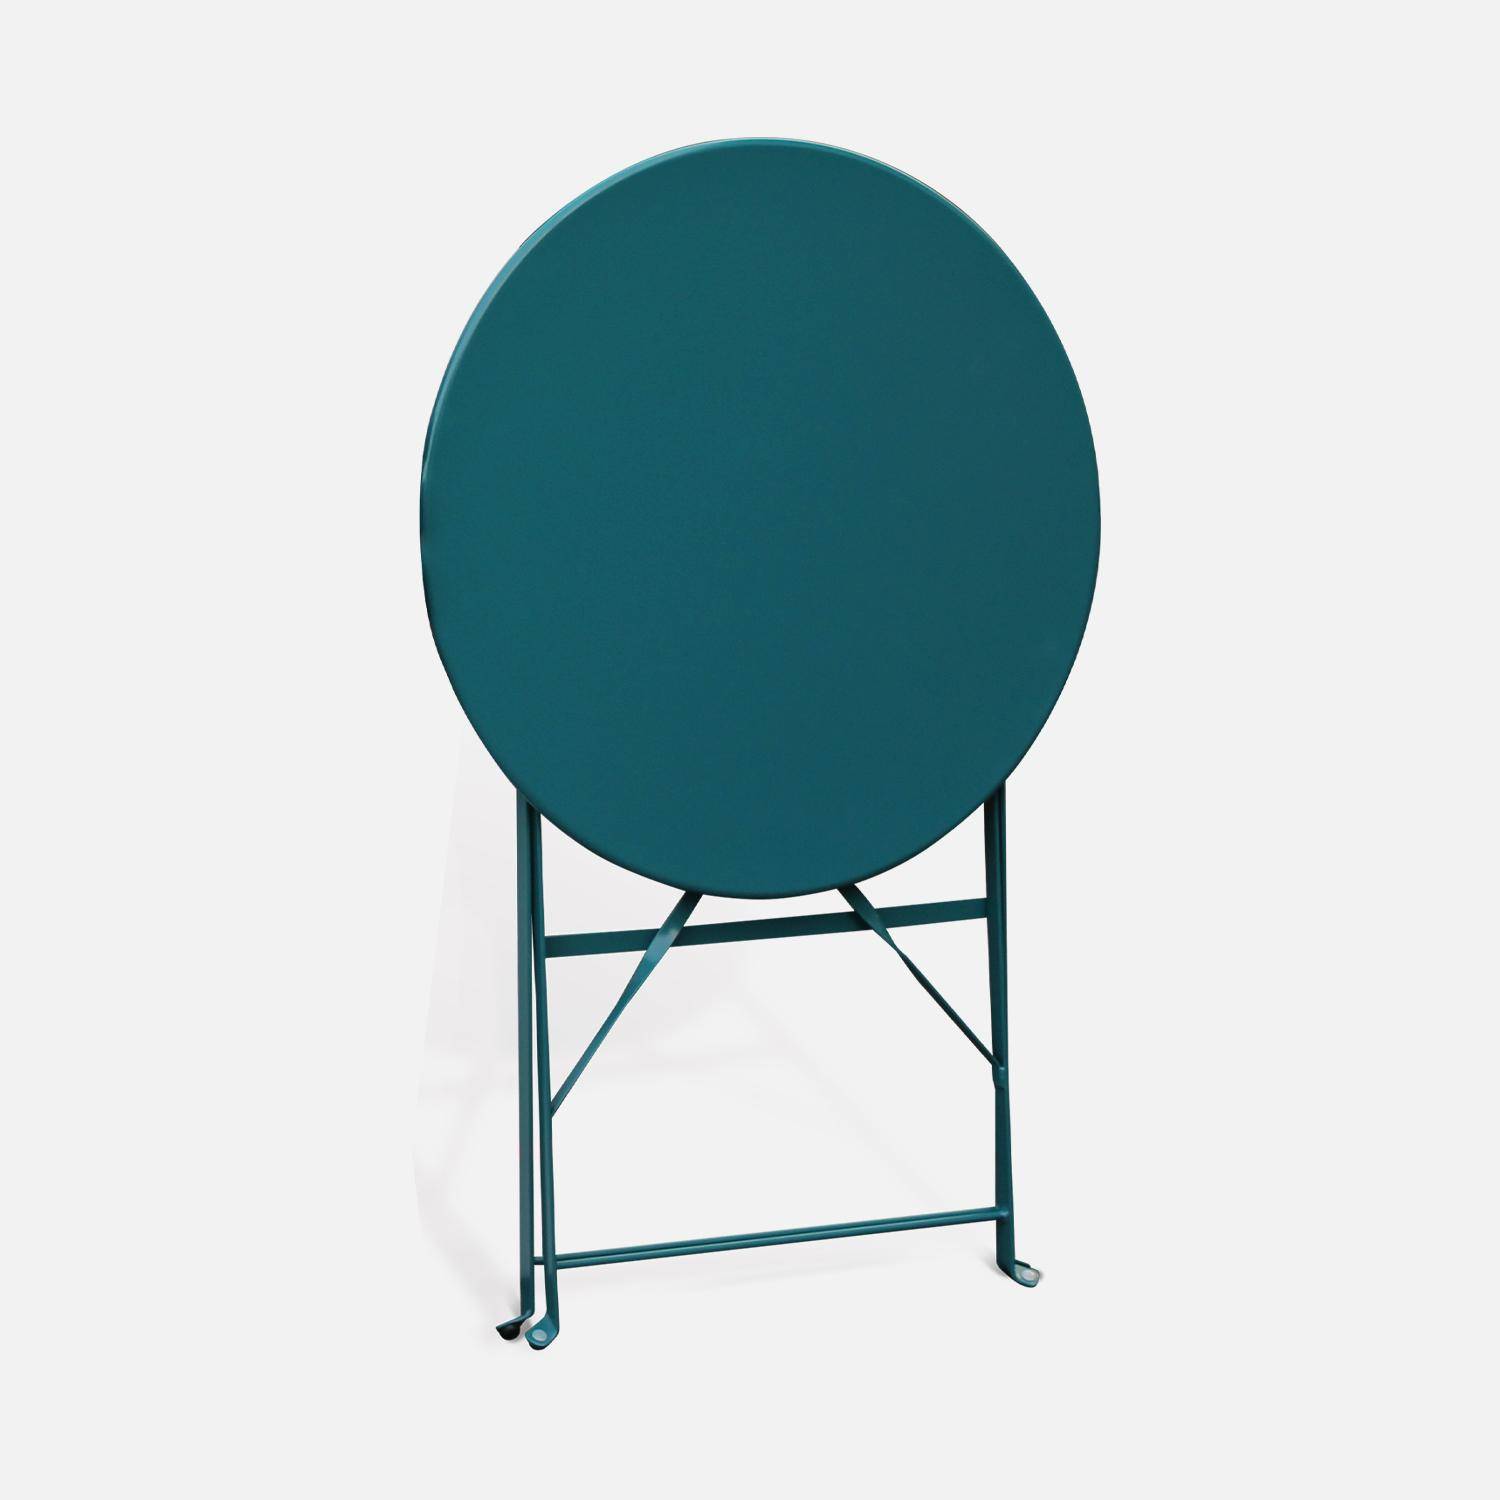 Foldable bistro garden table - Round Emilia duck blue - Round table Ø60cm, thermo-lacquered steel,sweeek,Photo4